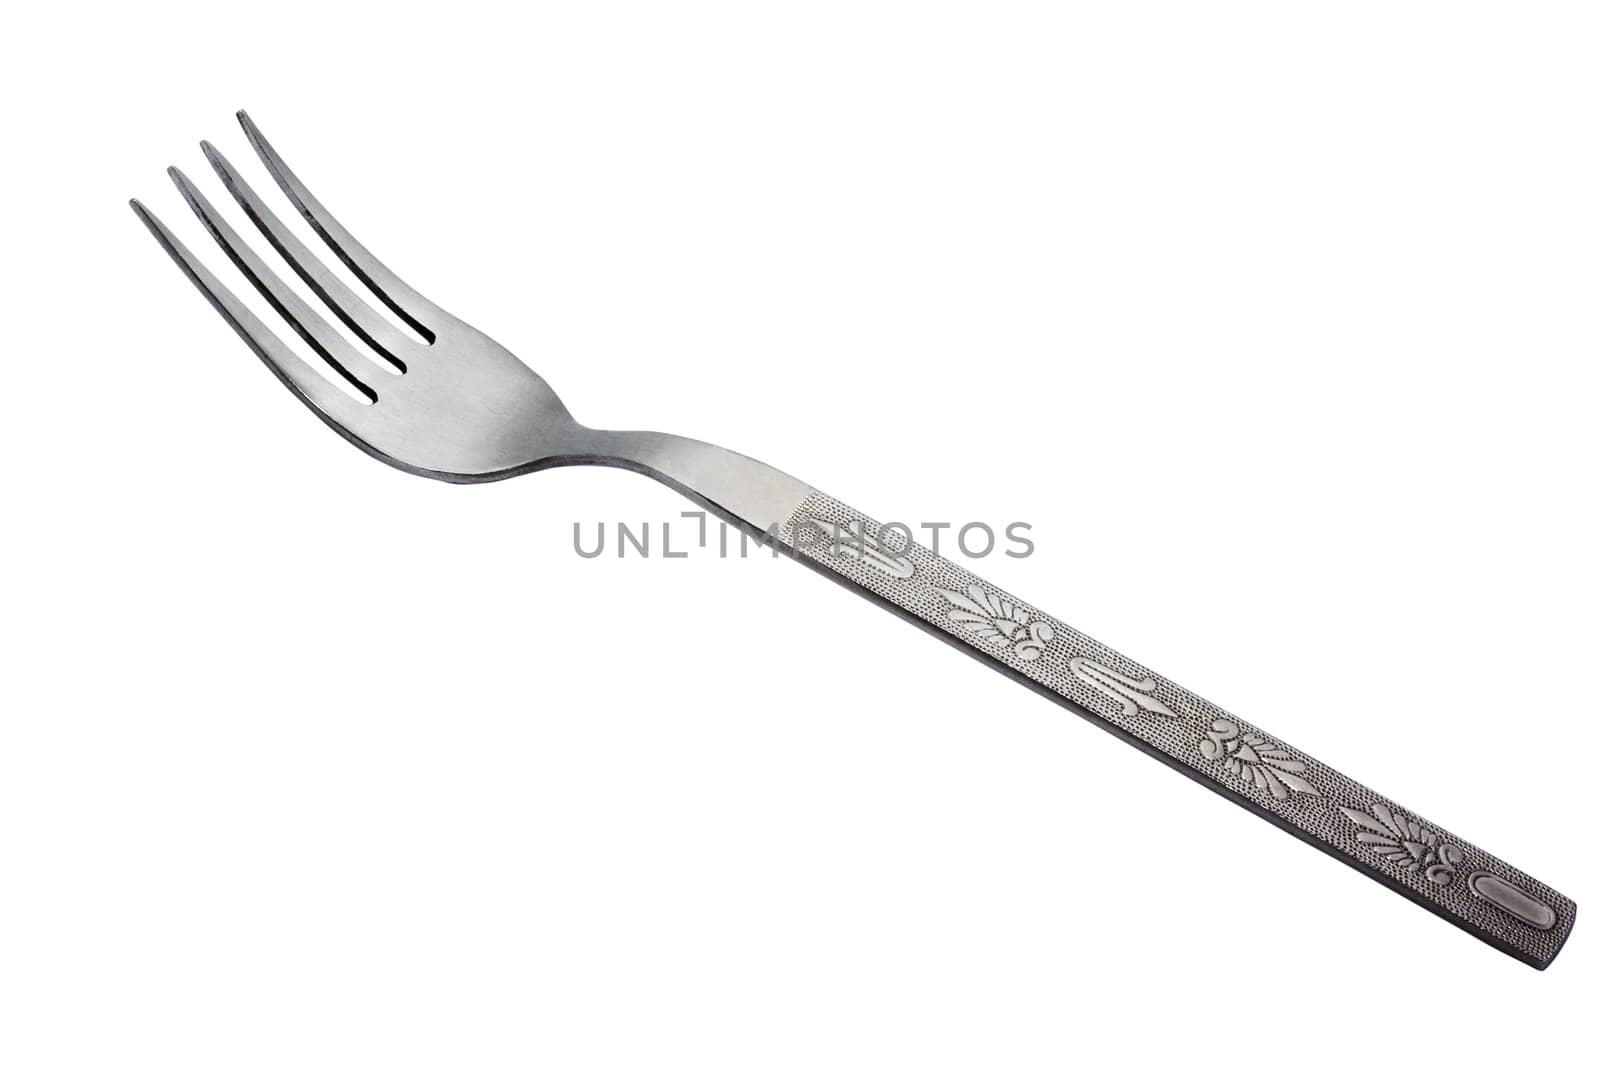 Old metallic fork isolated on white background. Clipping path included.